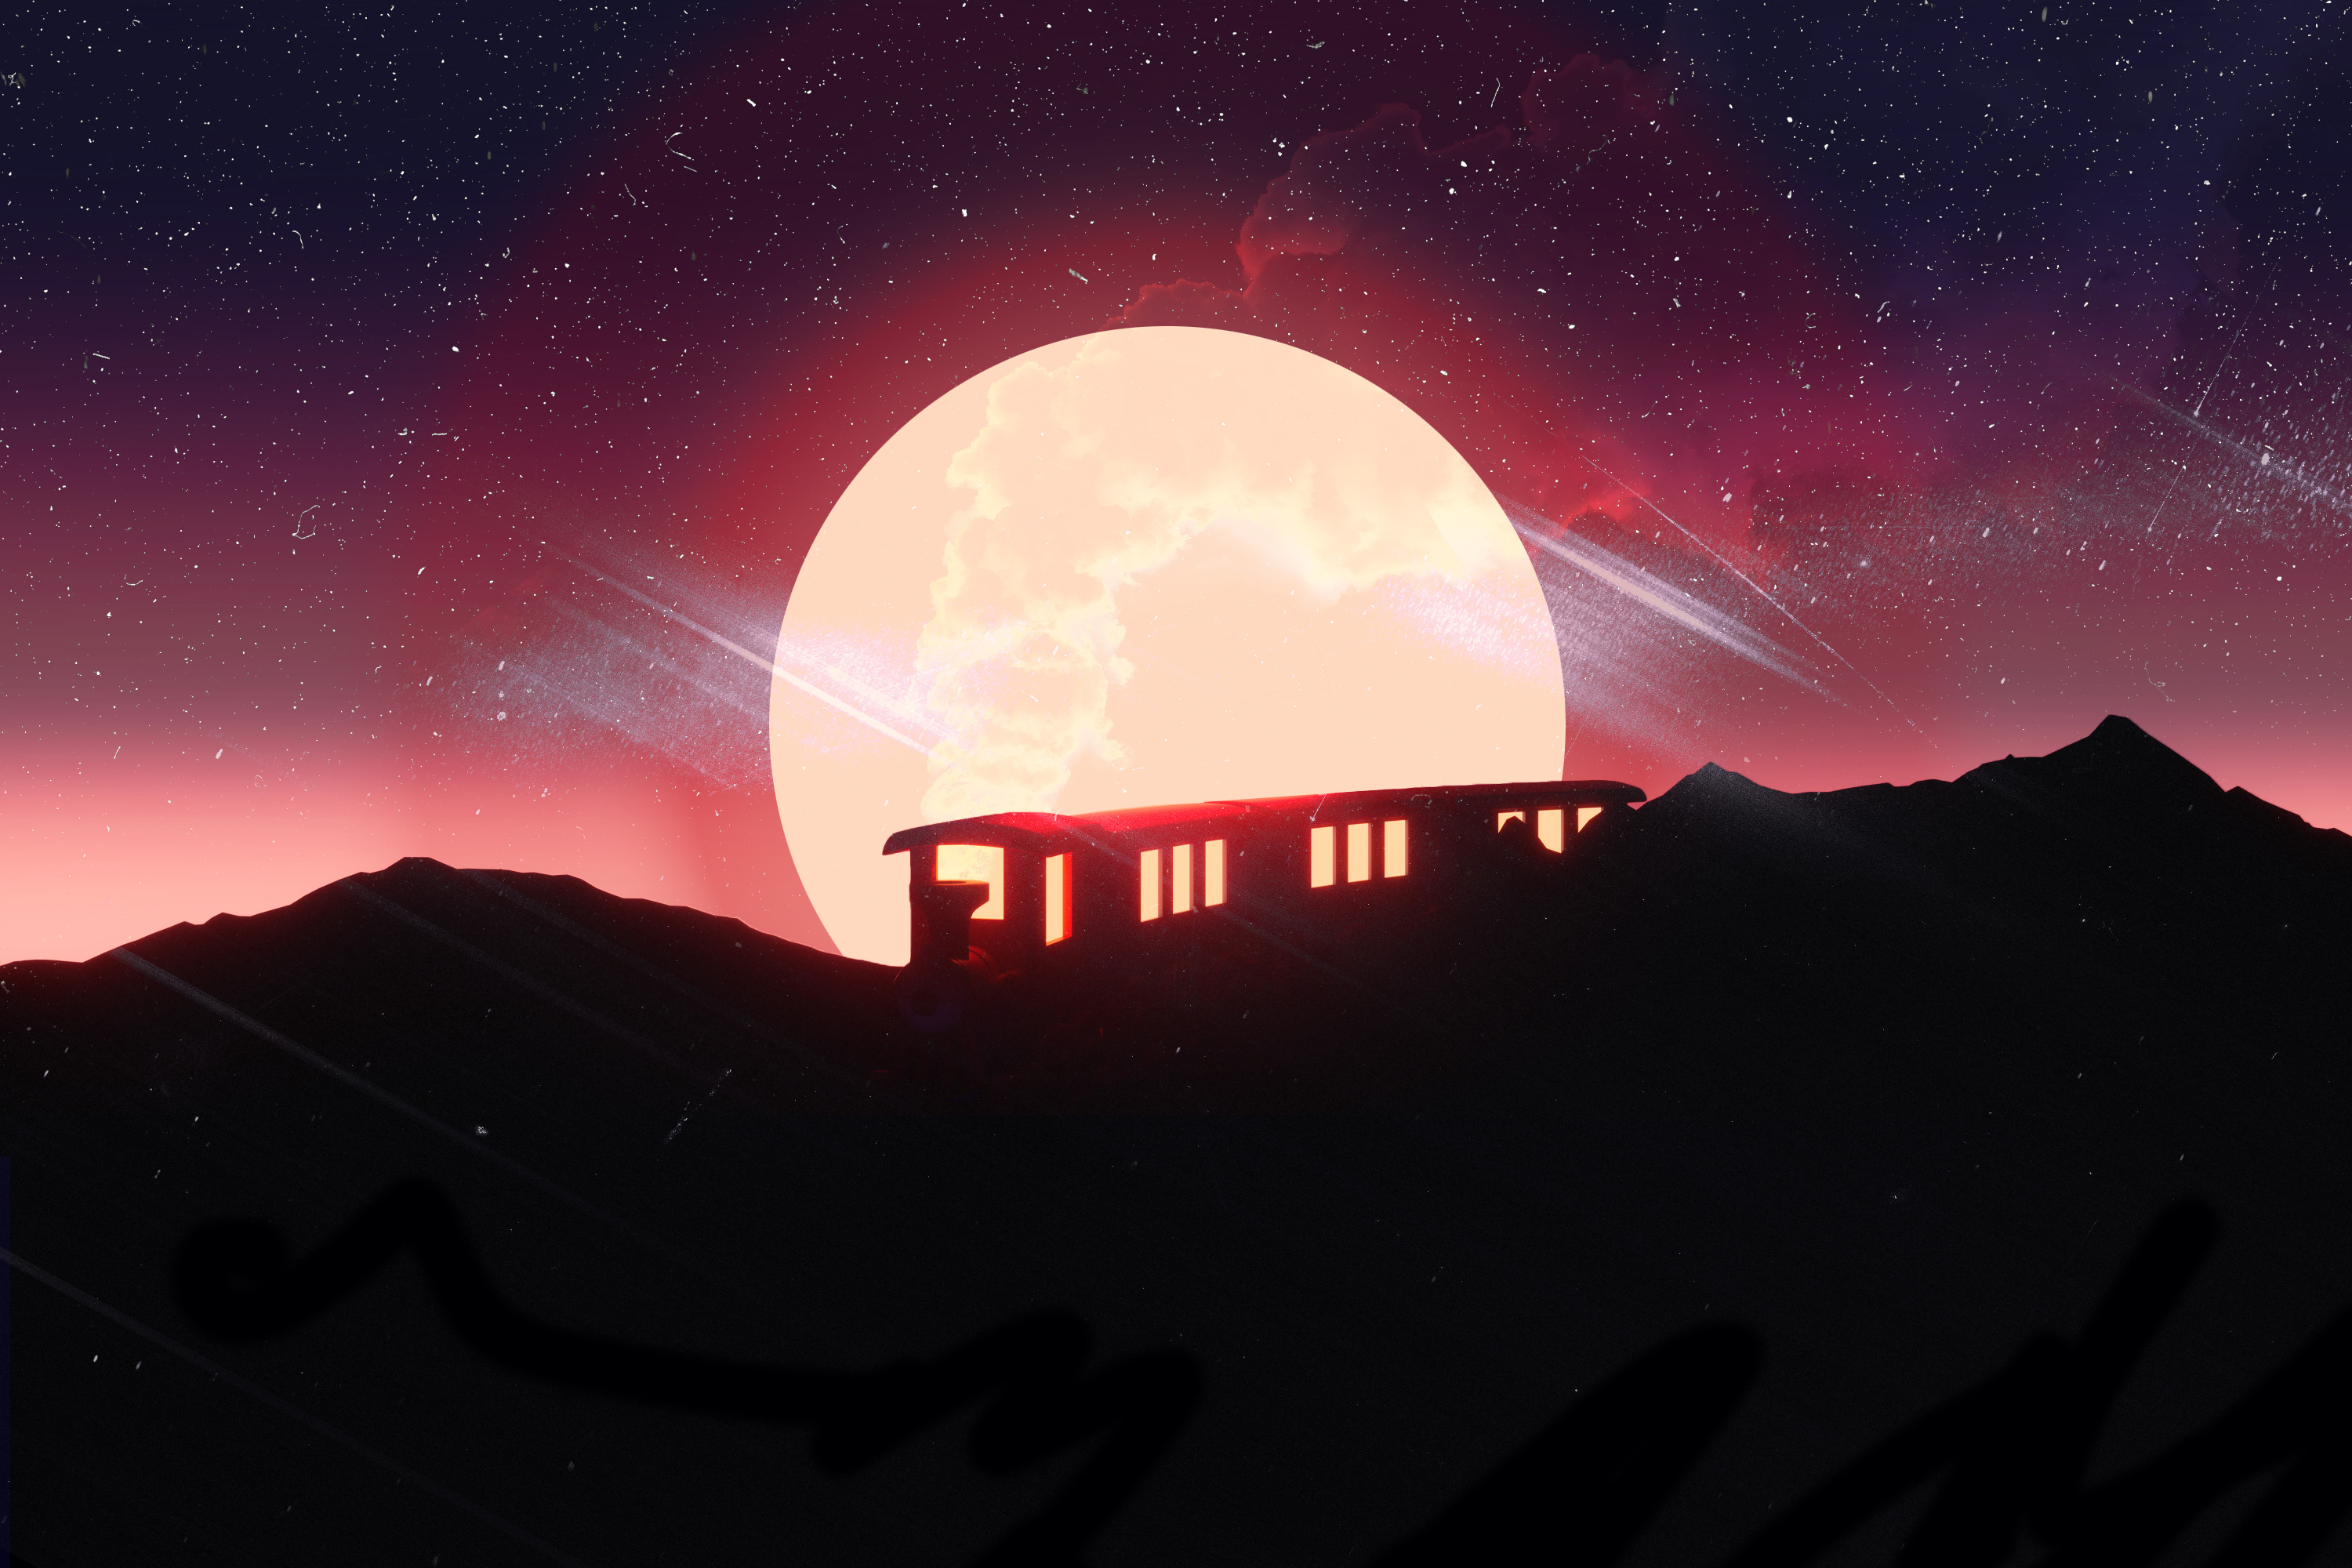 Illustration of the moon rising over a dark hill.